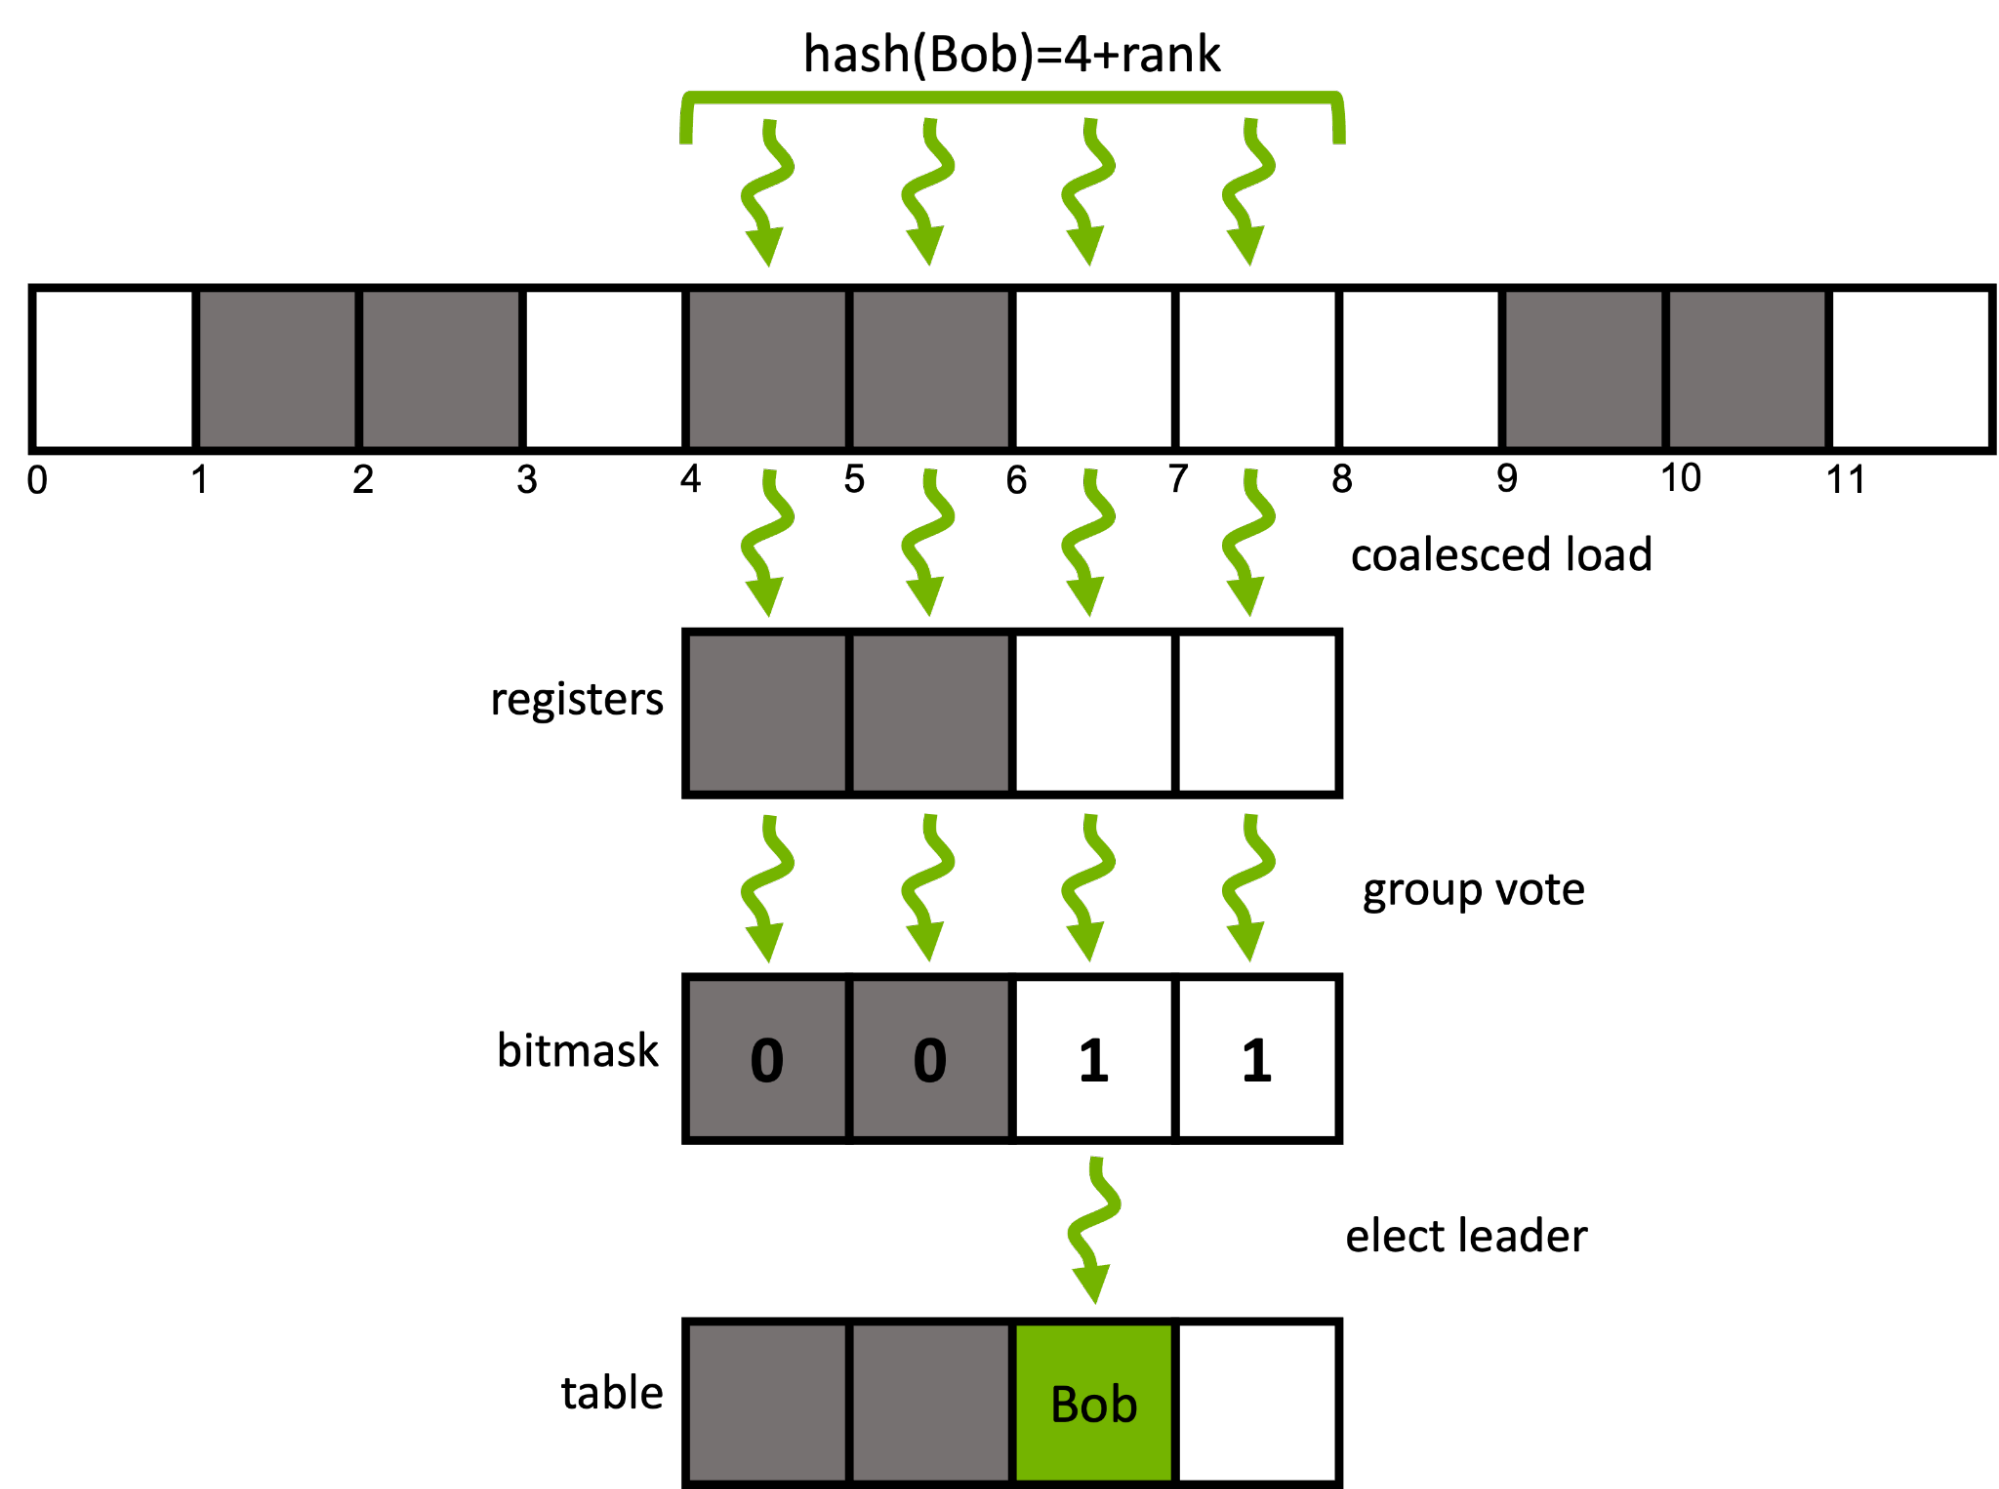 Diagram showing a group-cooperative probing step for the key Bob with its intermediate steps. A cooperative group of four threads is used to insert the key Bob into the hash table. Starting from the initial probing index determined by the hash value of the key, a coalesced window of buckets is loaded into local registers and determine a candidate bucket using `ballot` intrinsics.